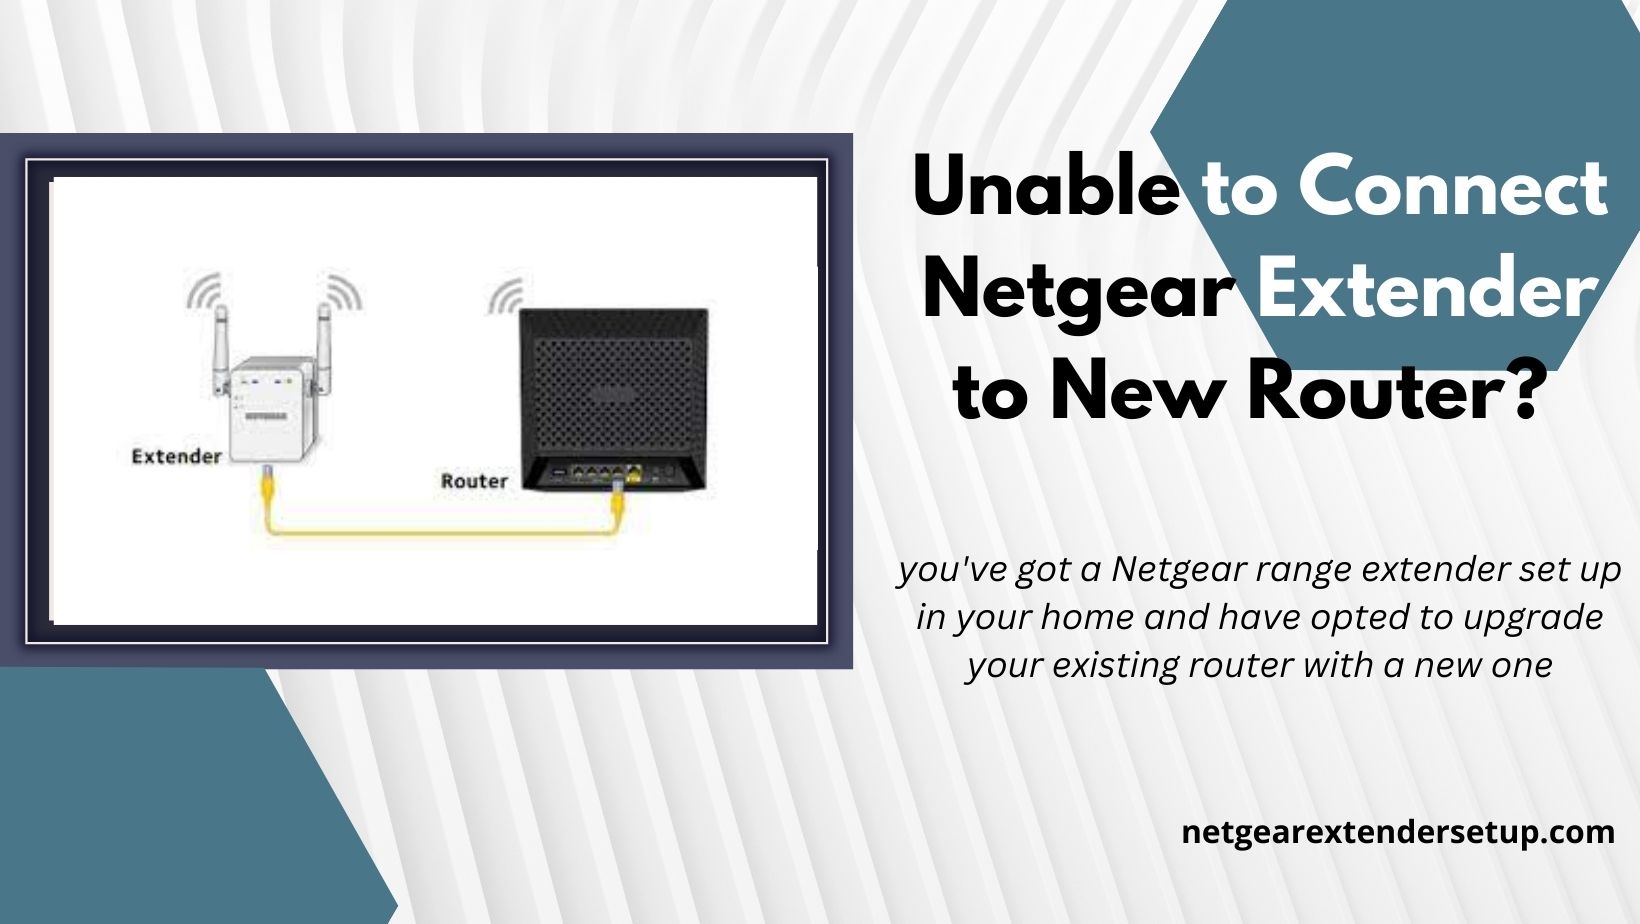 You are currently viewing Unable to Connect Netgear Extender to New Router? Let’s Provide Assistance!